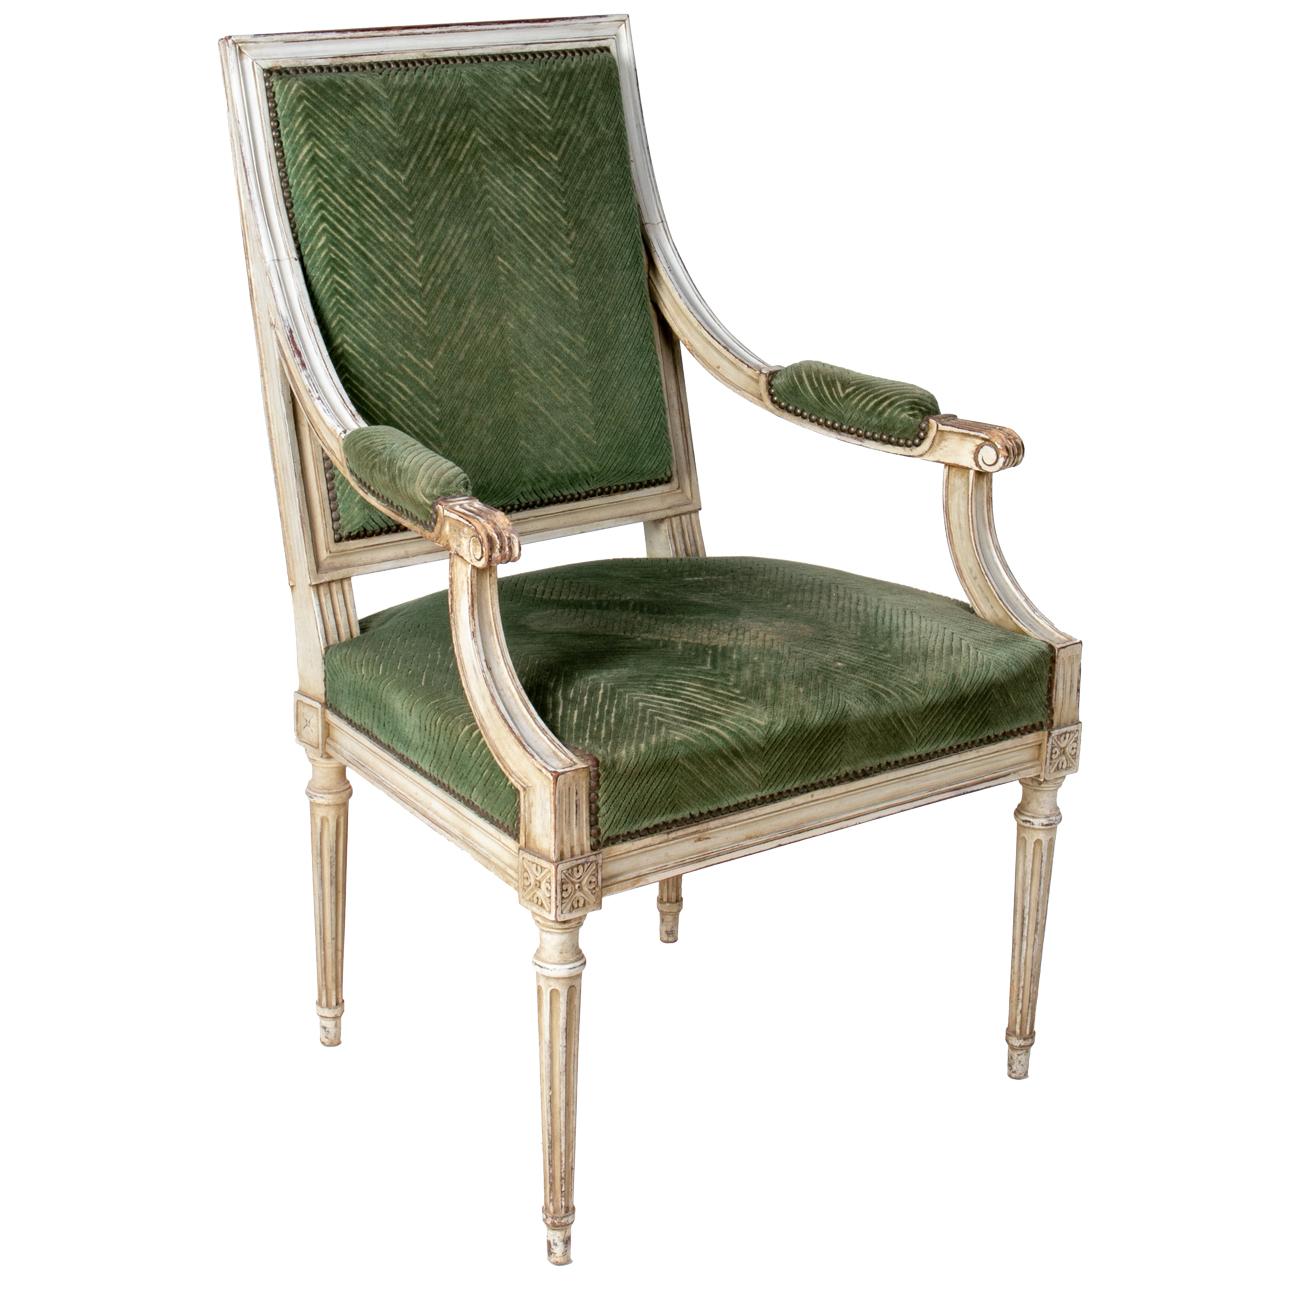 1870s French Louis XVI Style White Lacquered and Velvet Upholstered Armchair